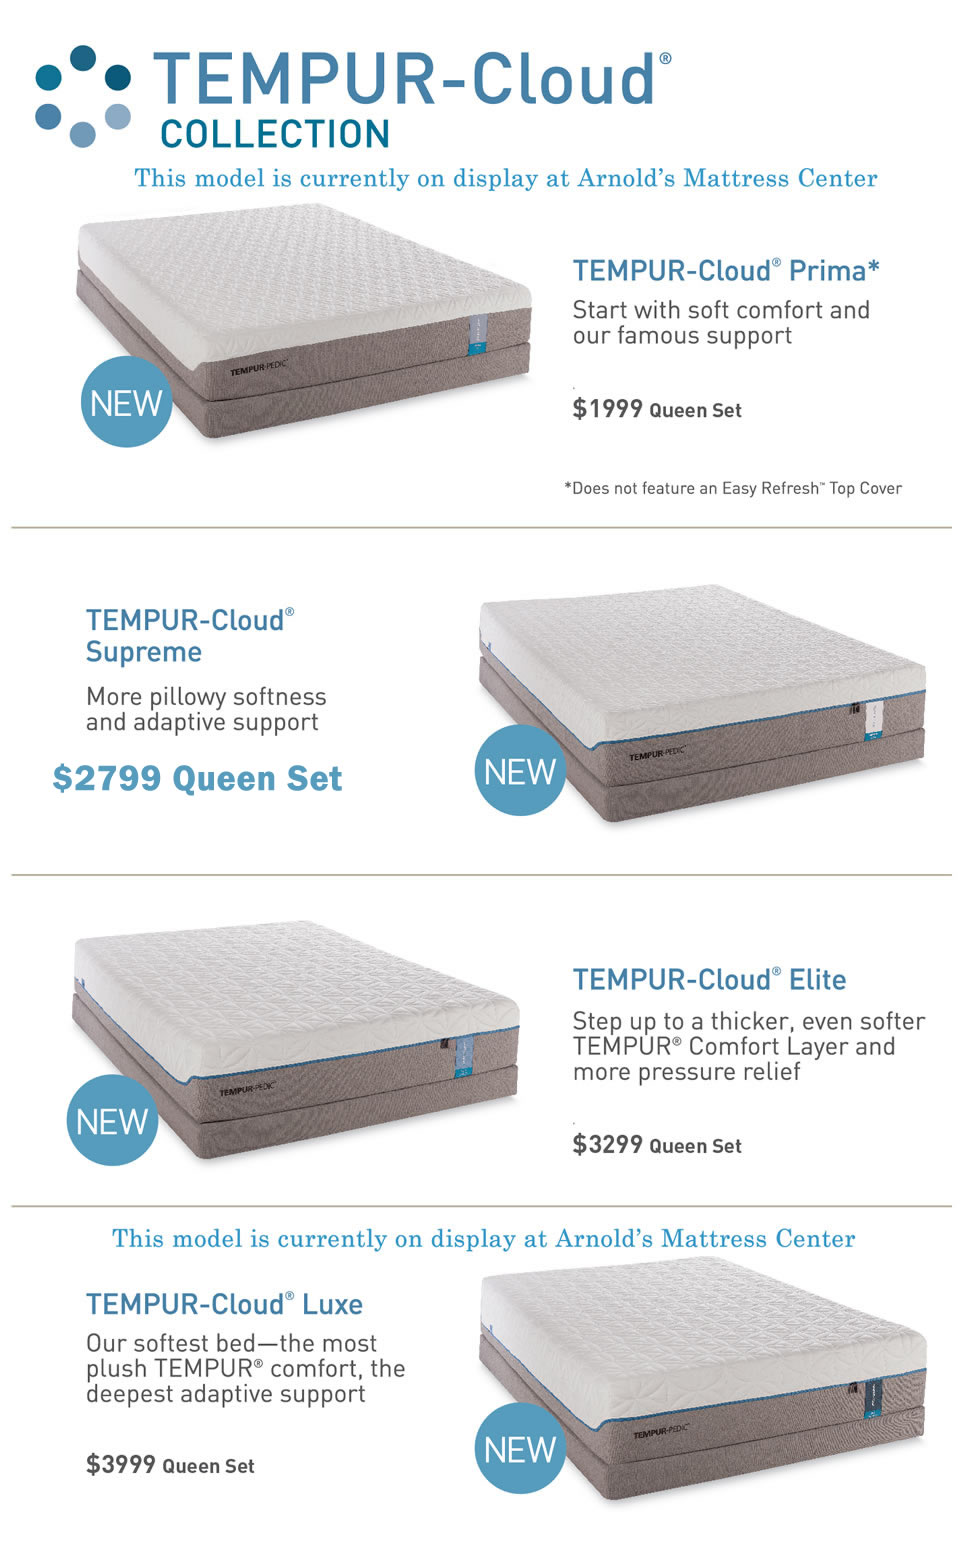 Tempurpedic Cloud Collection of mattresses on sale.